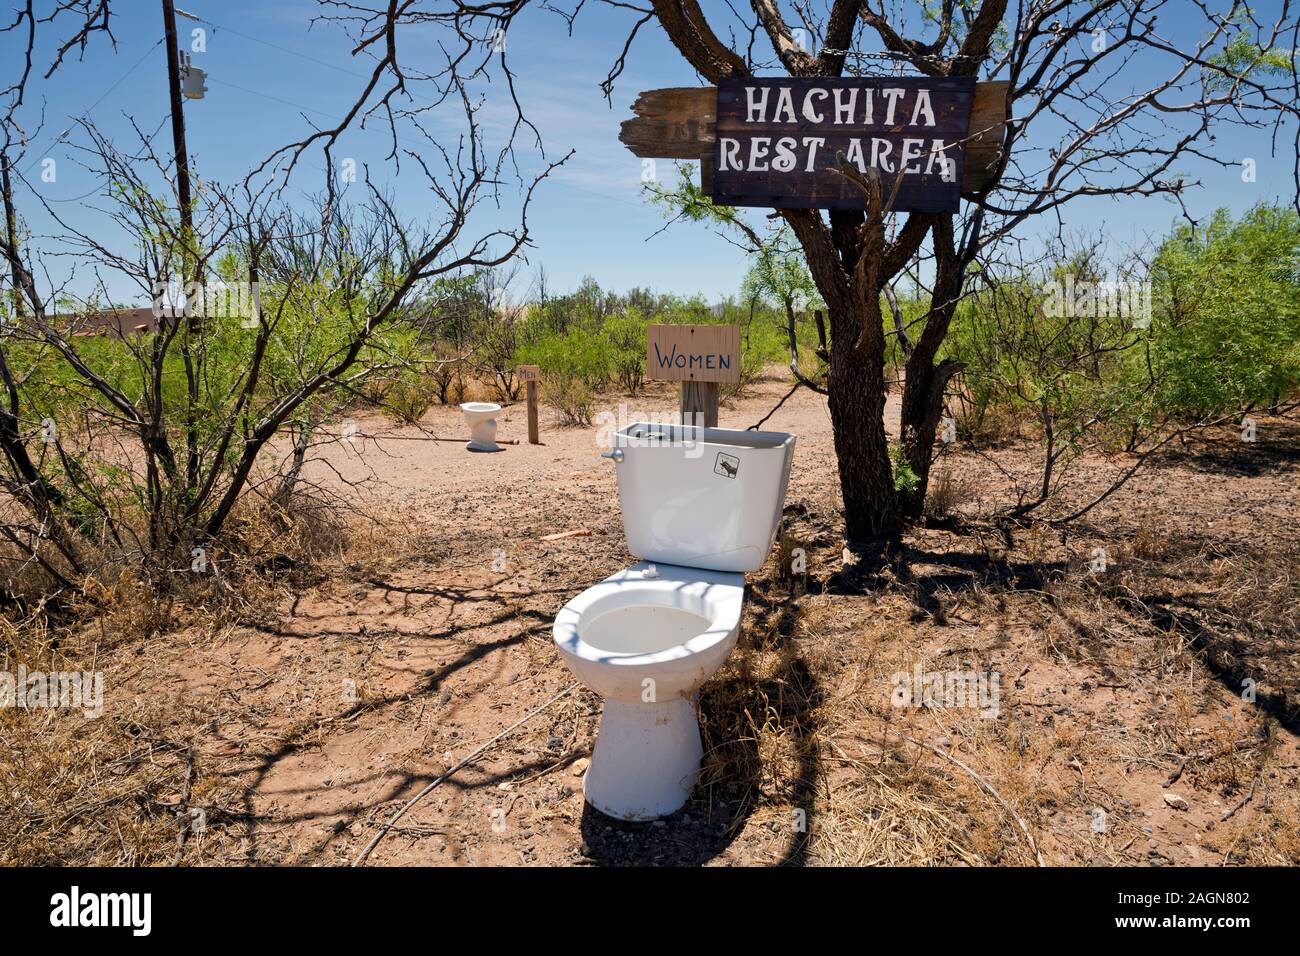 NM00177-00...NEW MEXICO - A tongue in cheek Rest Area at Hachita, an old mining town located in the Chiricahua Desert. Stock Photo